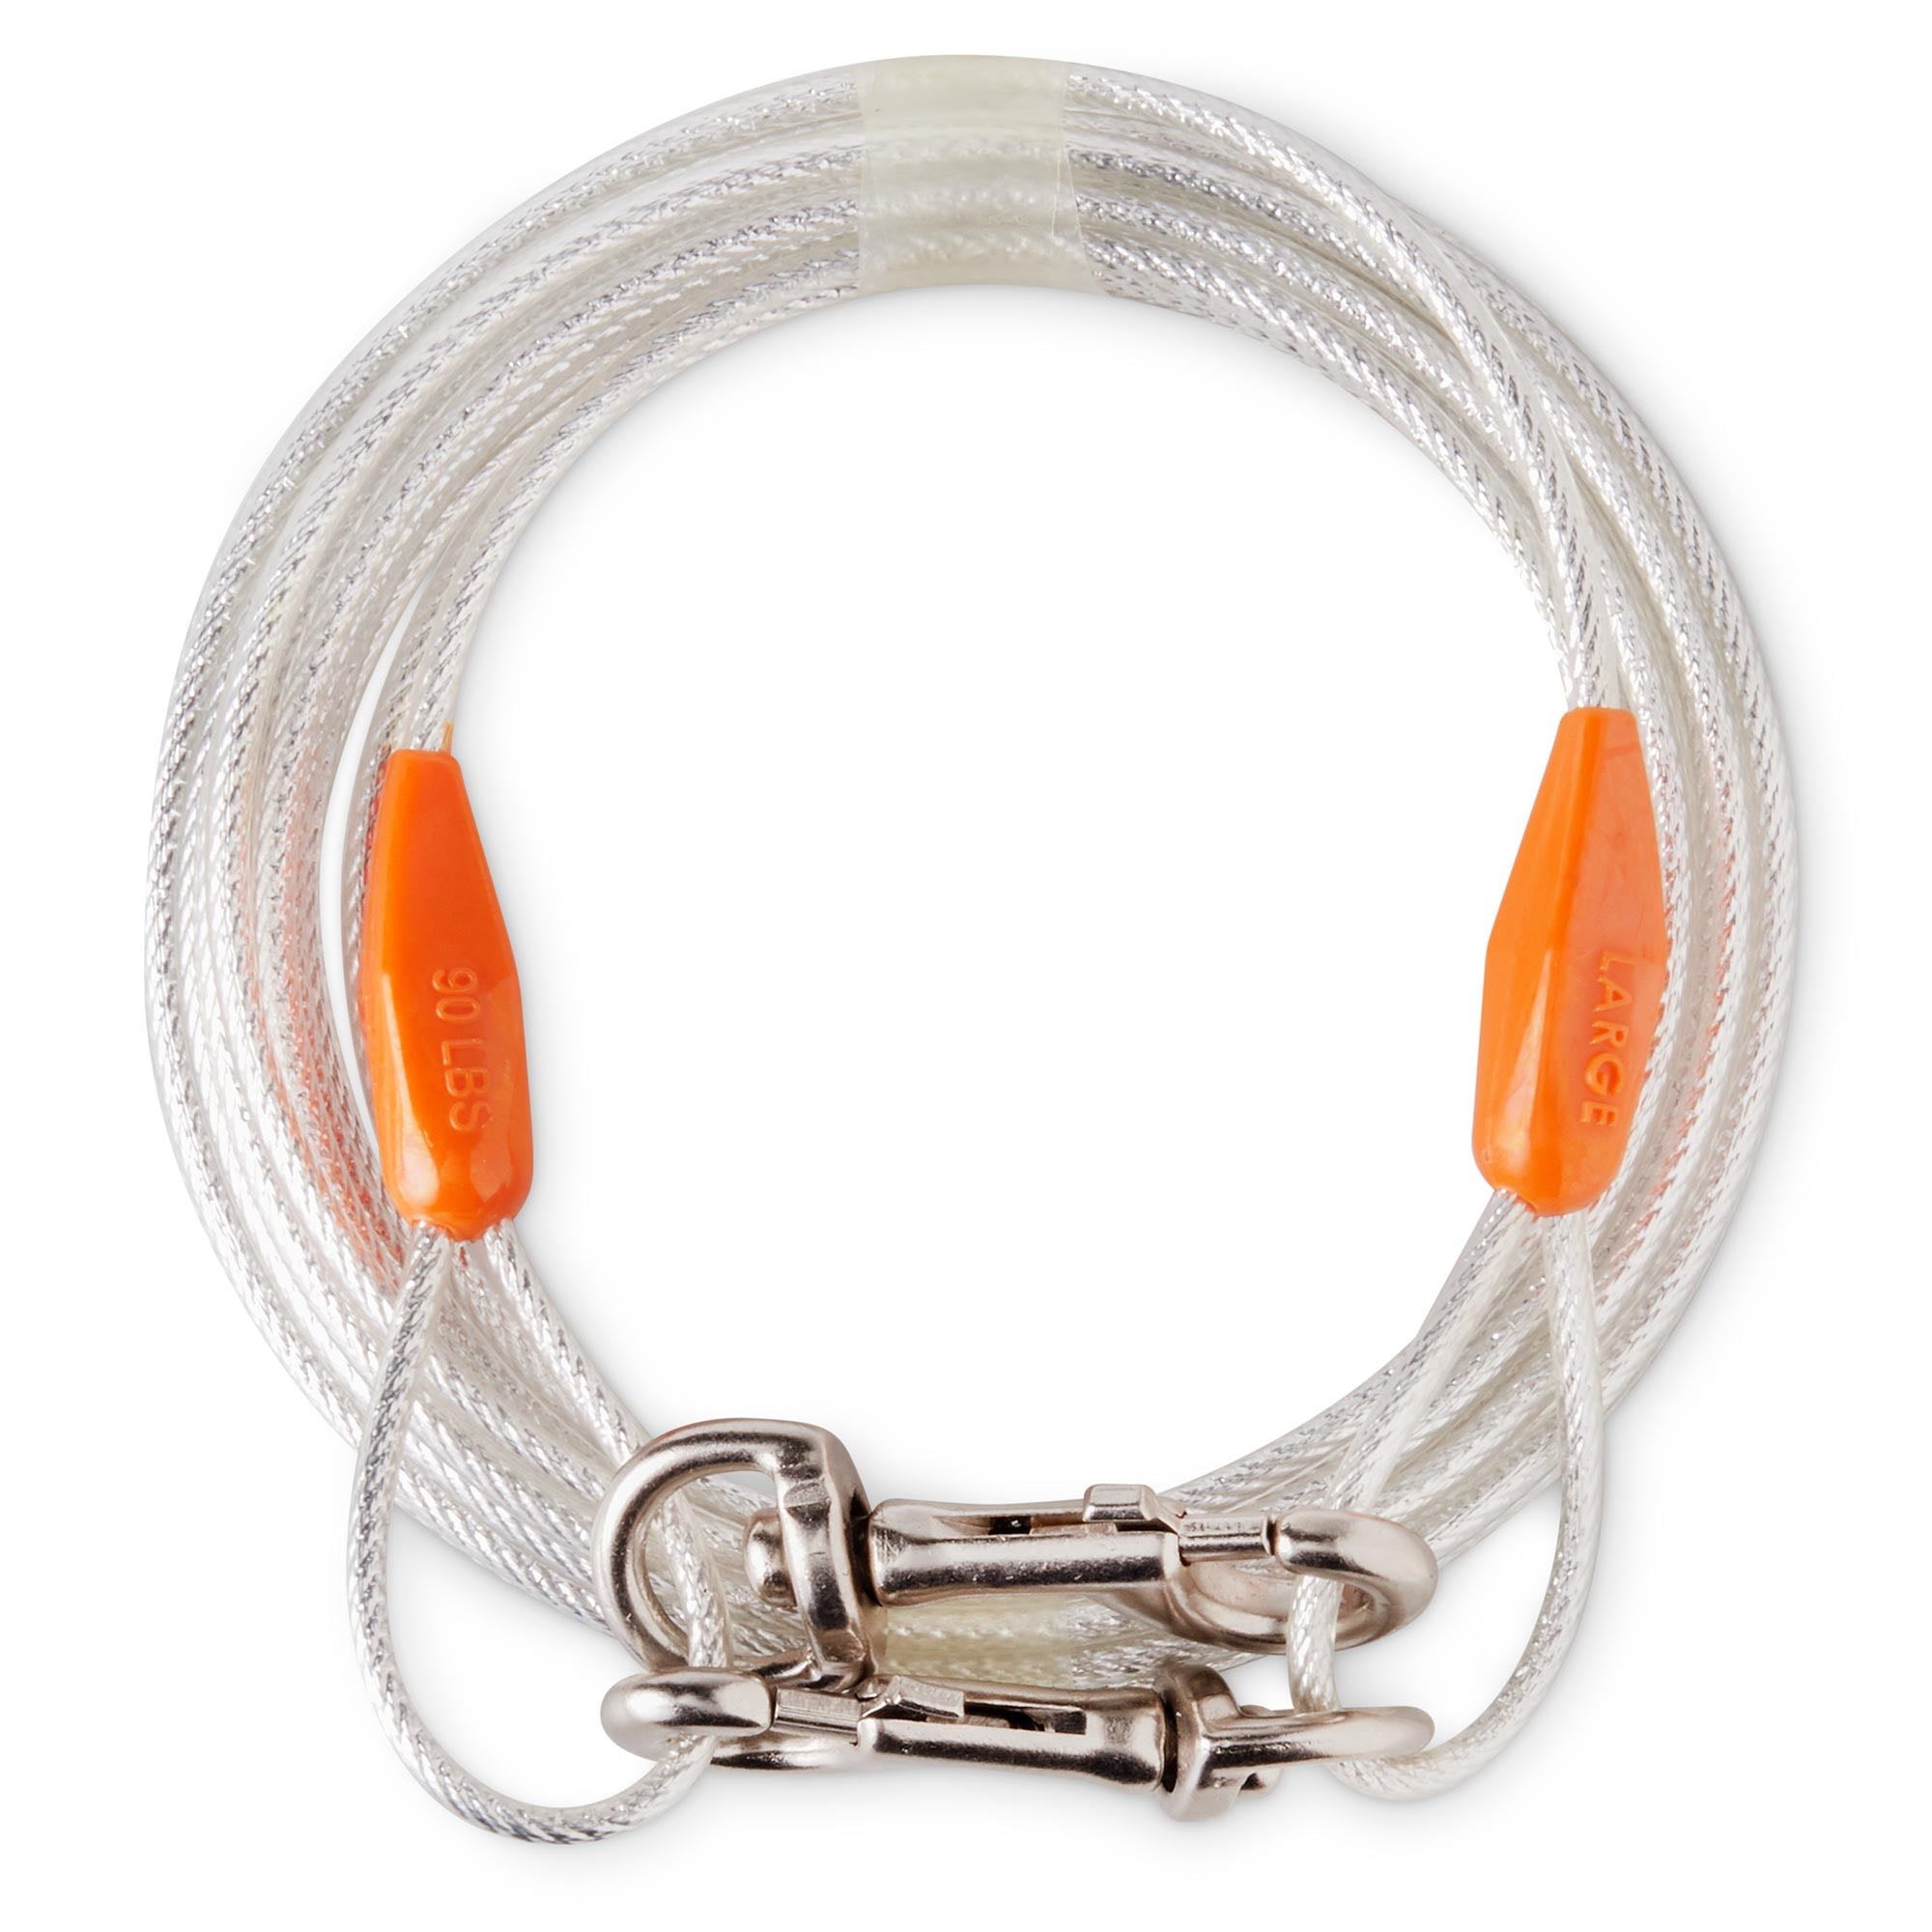 Vibrant Life 25ft Reflective Vinyl-Covered Tie-Out Cable for Dogs Up To 90 Pounds